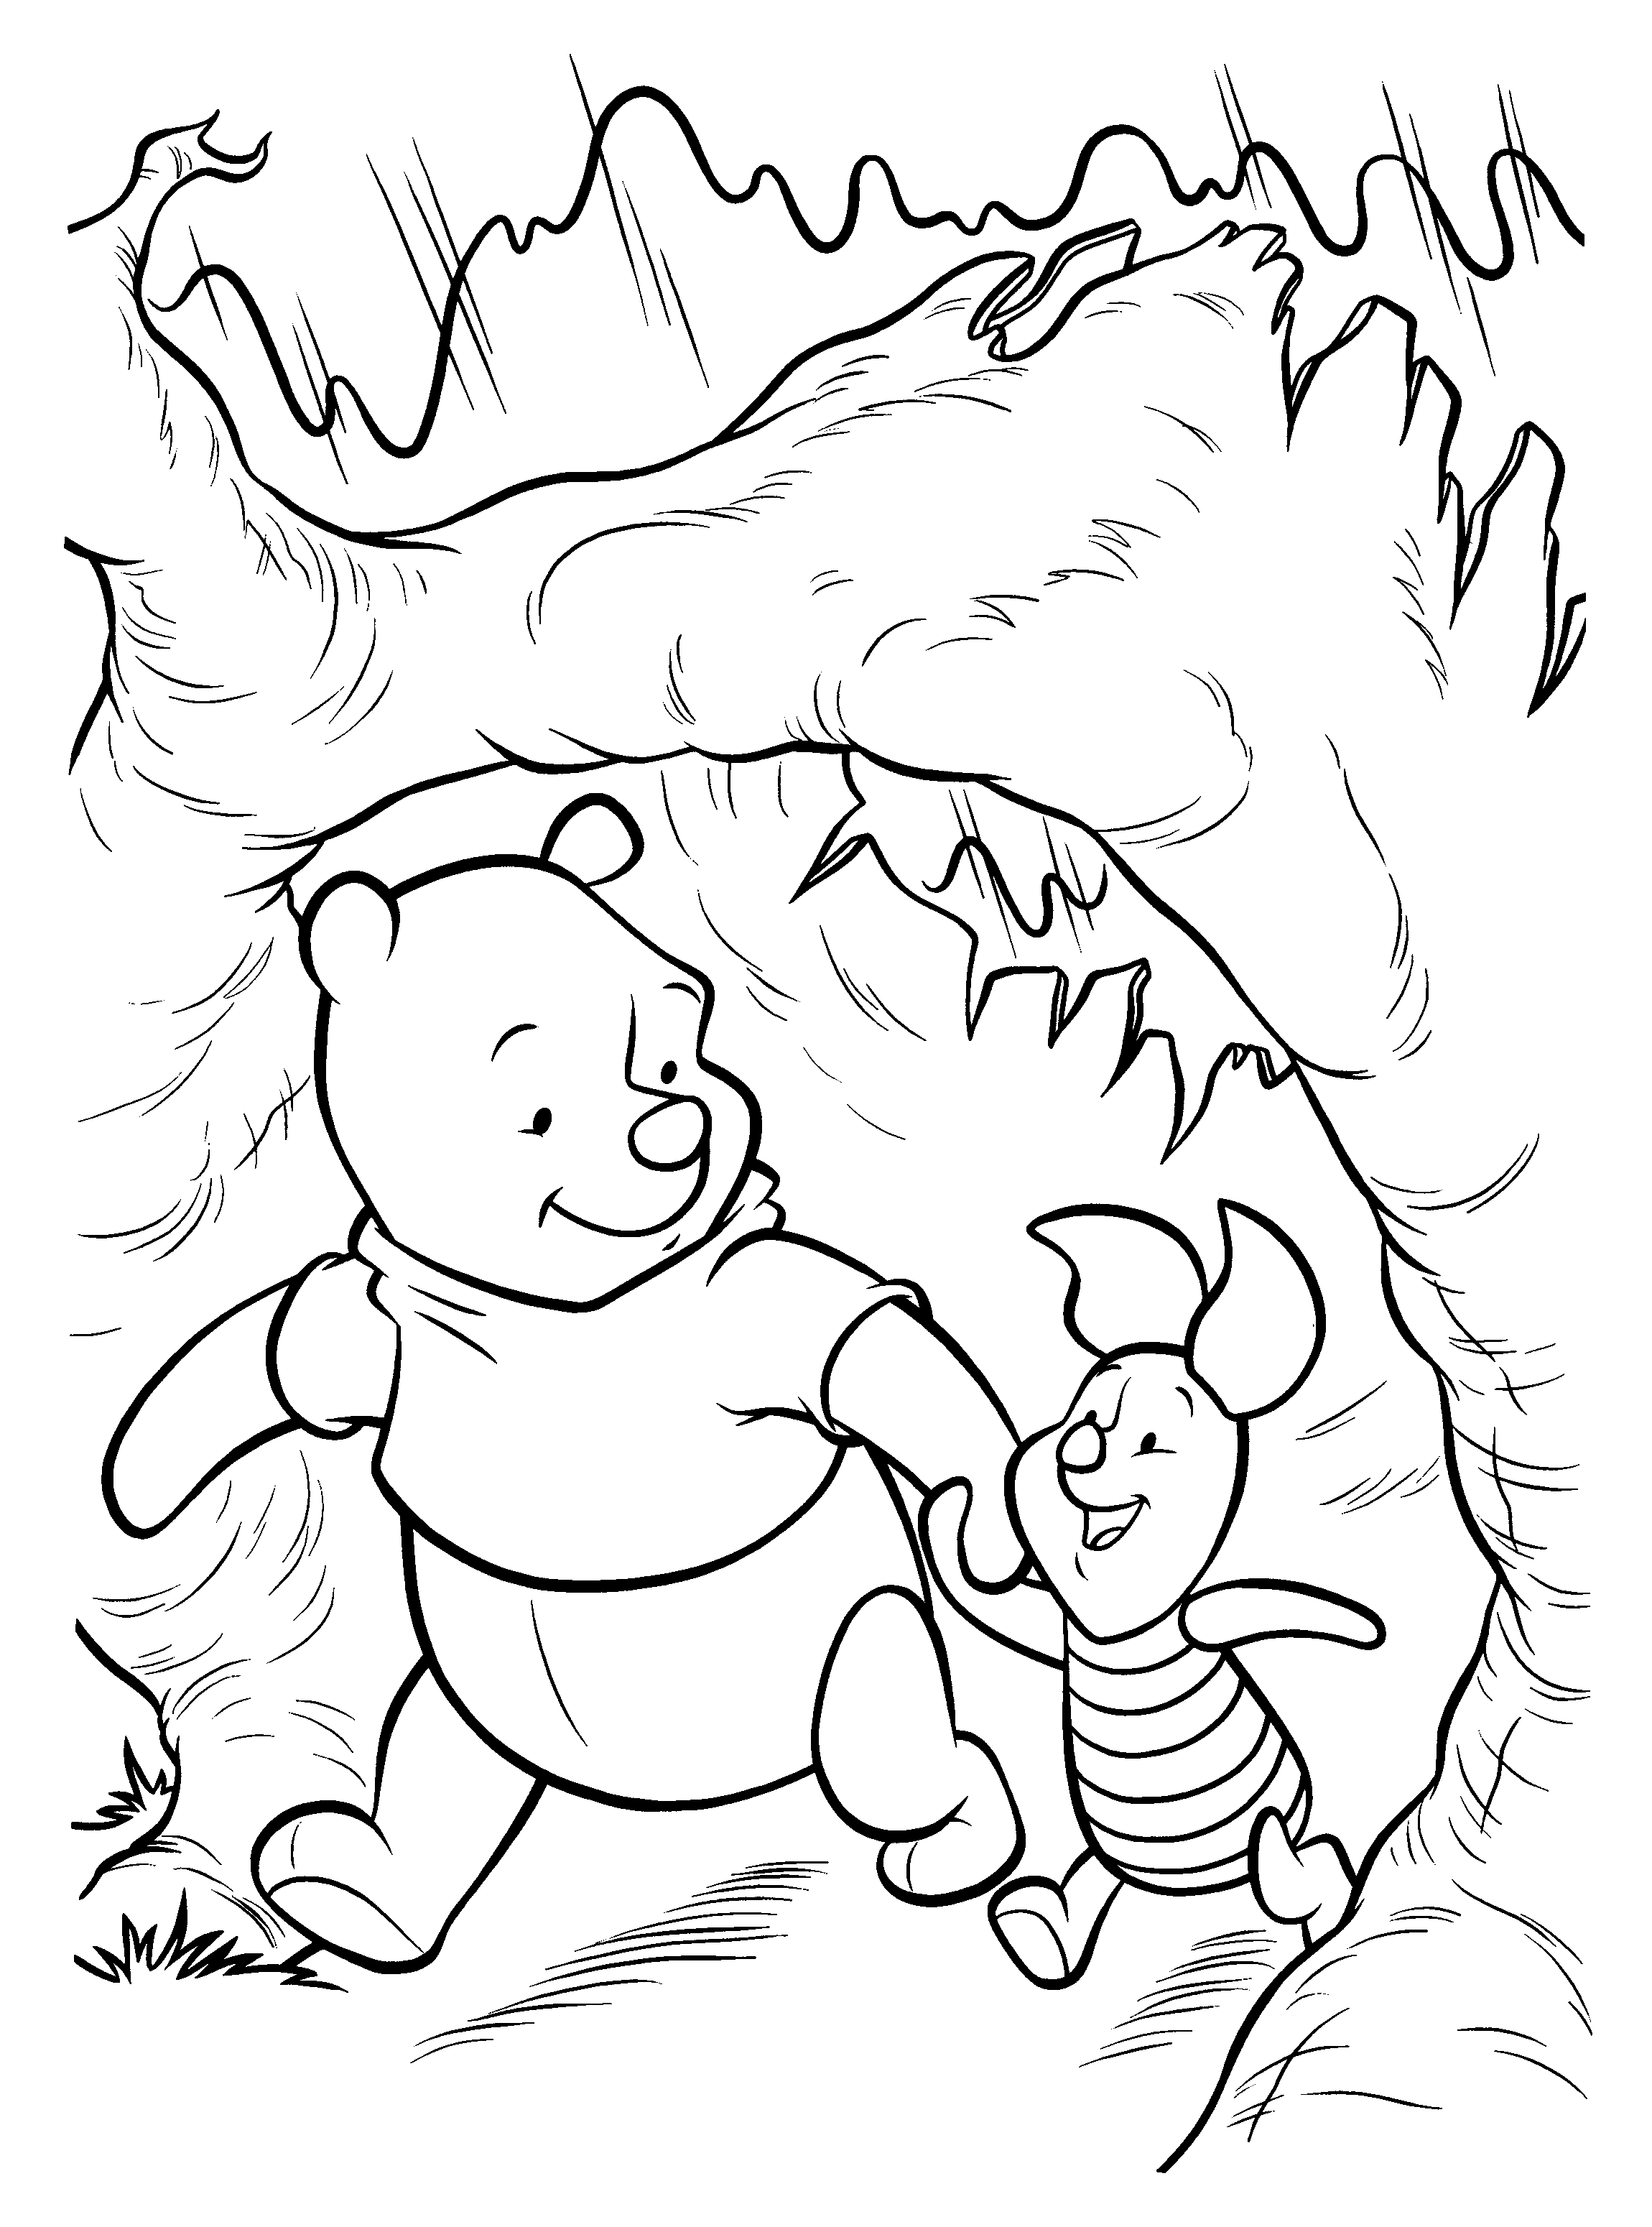 animated-coloring-pages-winnie-the-pooh-image-0066